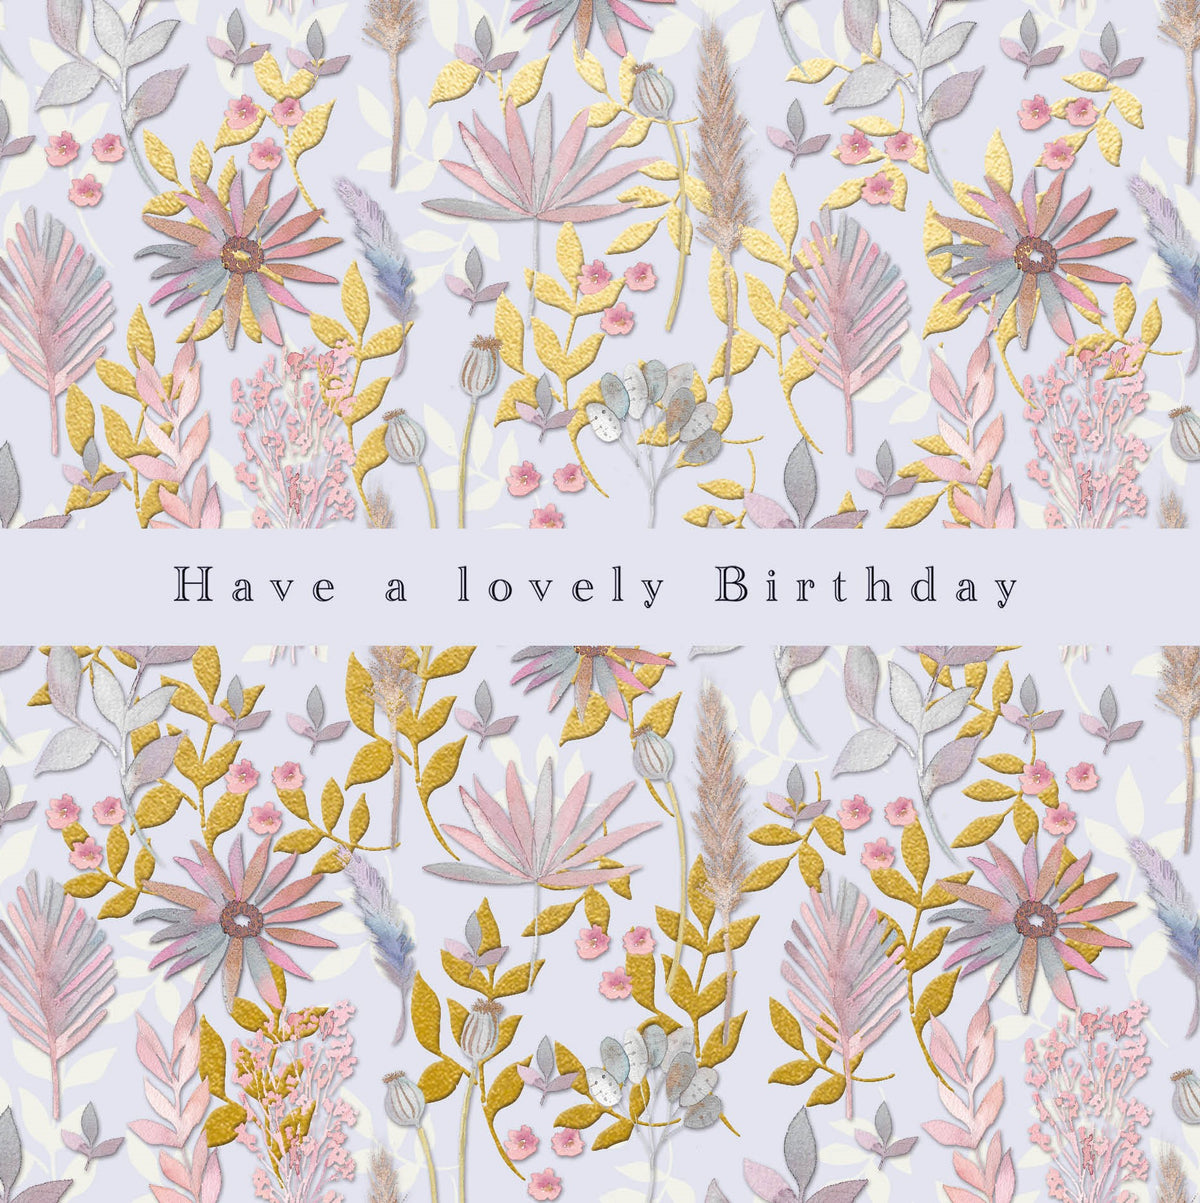 Dried Flower Lovely Birthday Card from Penny Black